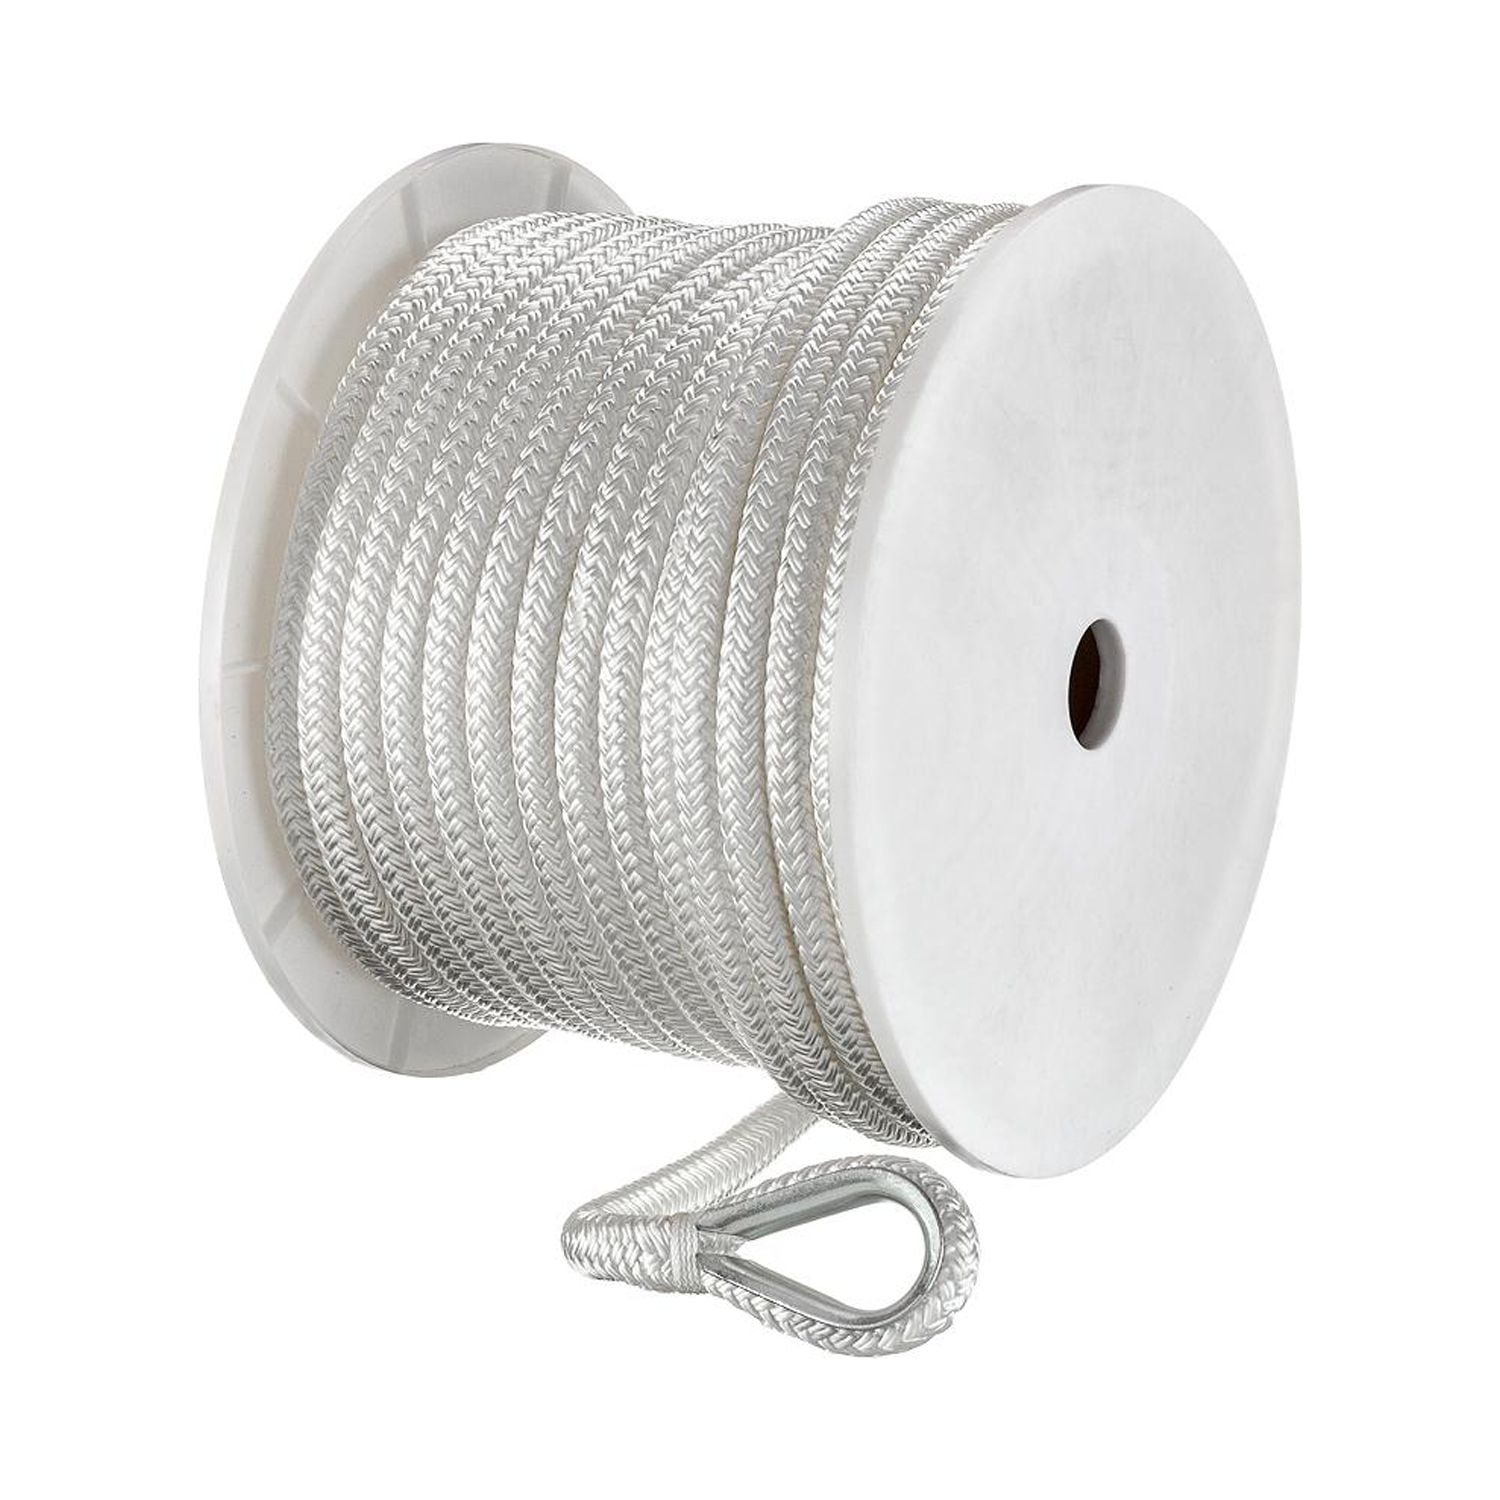 Seachoice Braided Utility Line Boat Rope, 1/8 in. X 100 Ft., White